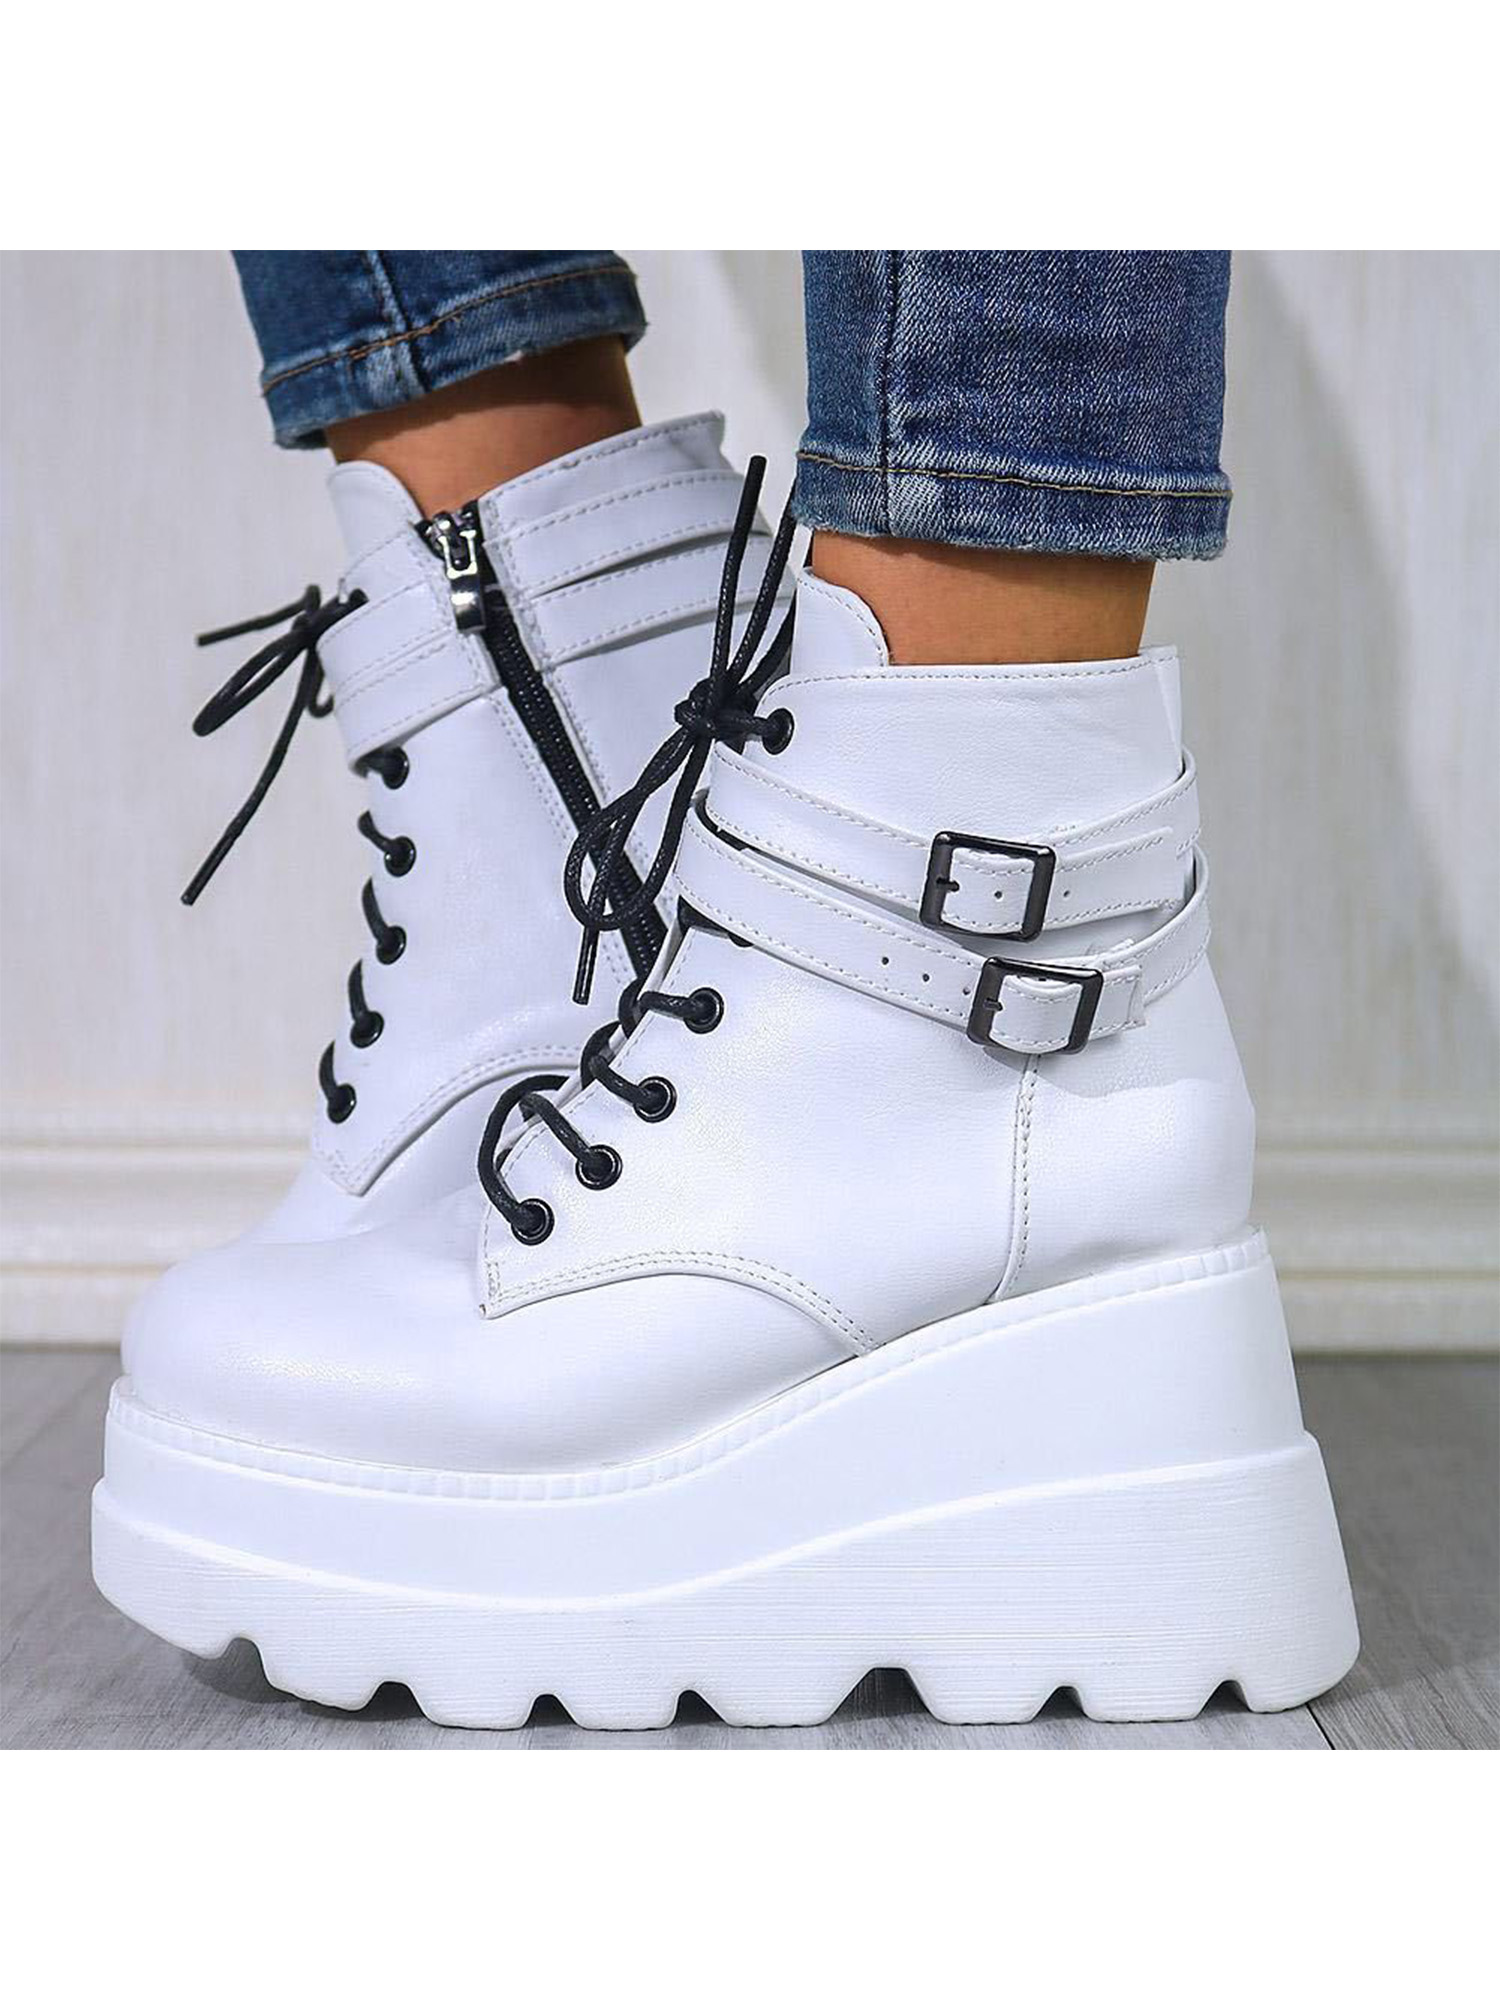 Wazshop Womens Shoes Platform Shoes Ankle Boots High Heel Shoes Round Toe Casual Shoes - image 3 of 3